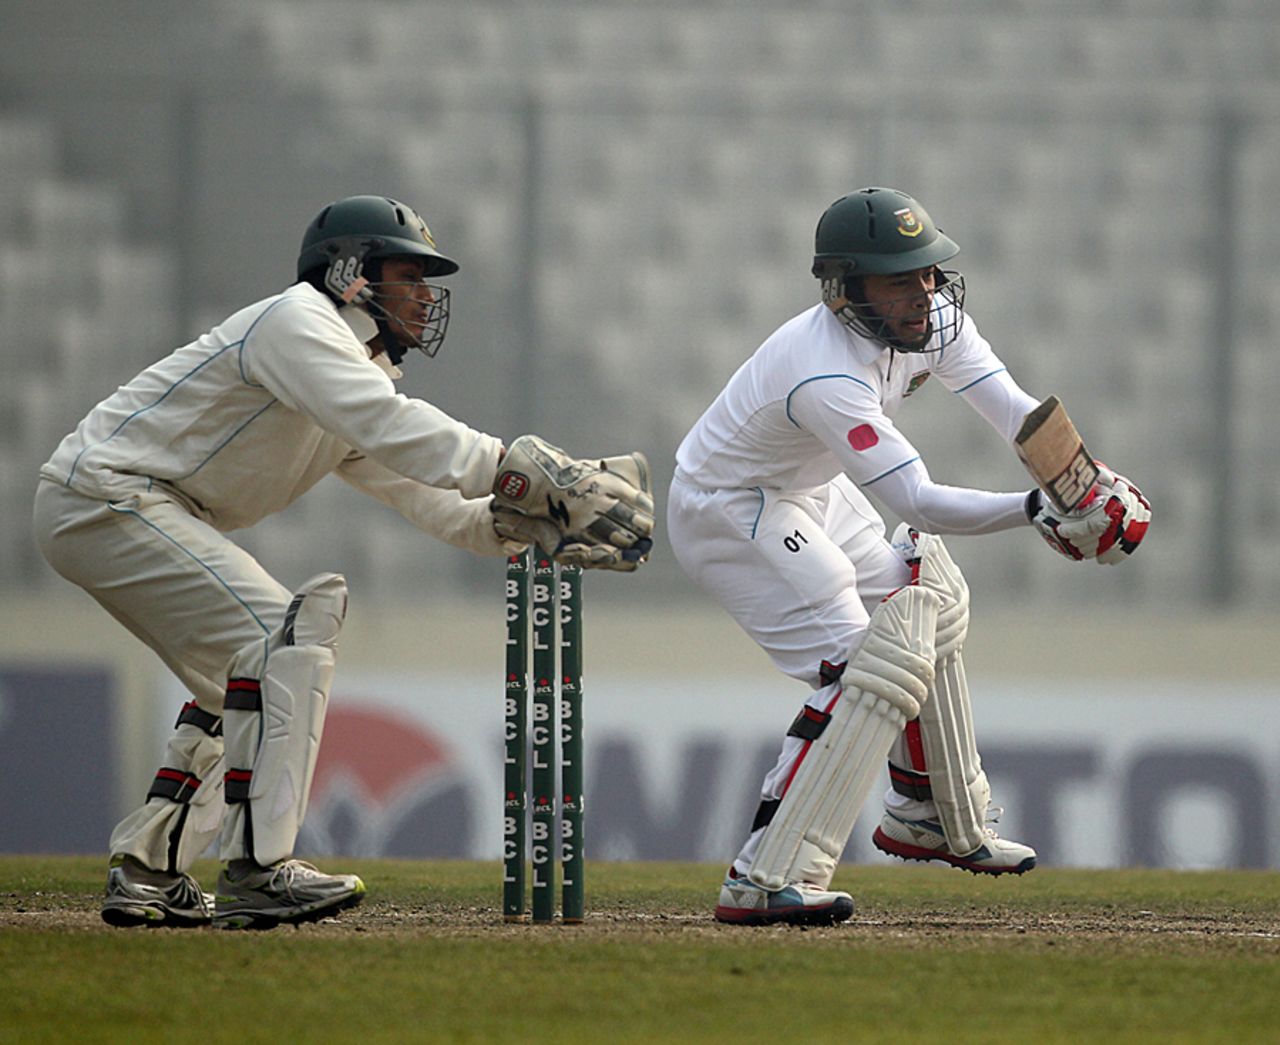 Mushfiqur Rahim top-scored in North Zone's second innings with 89, South Zone v North Zone, BCL 2012-13, Mirpur, 3rd day, January 10, 2013